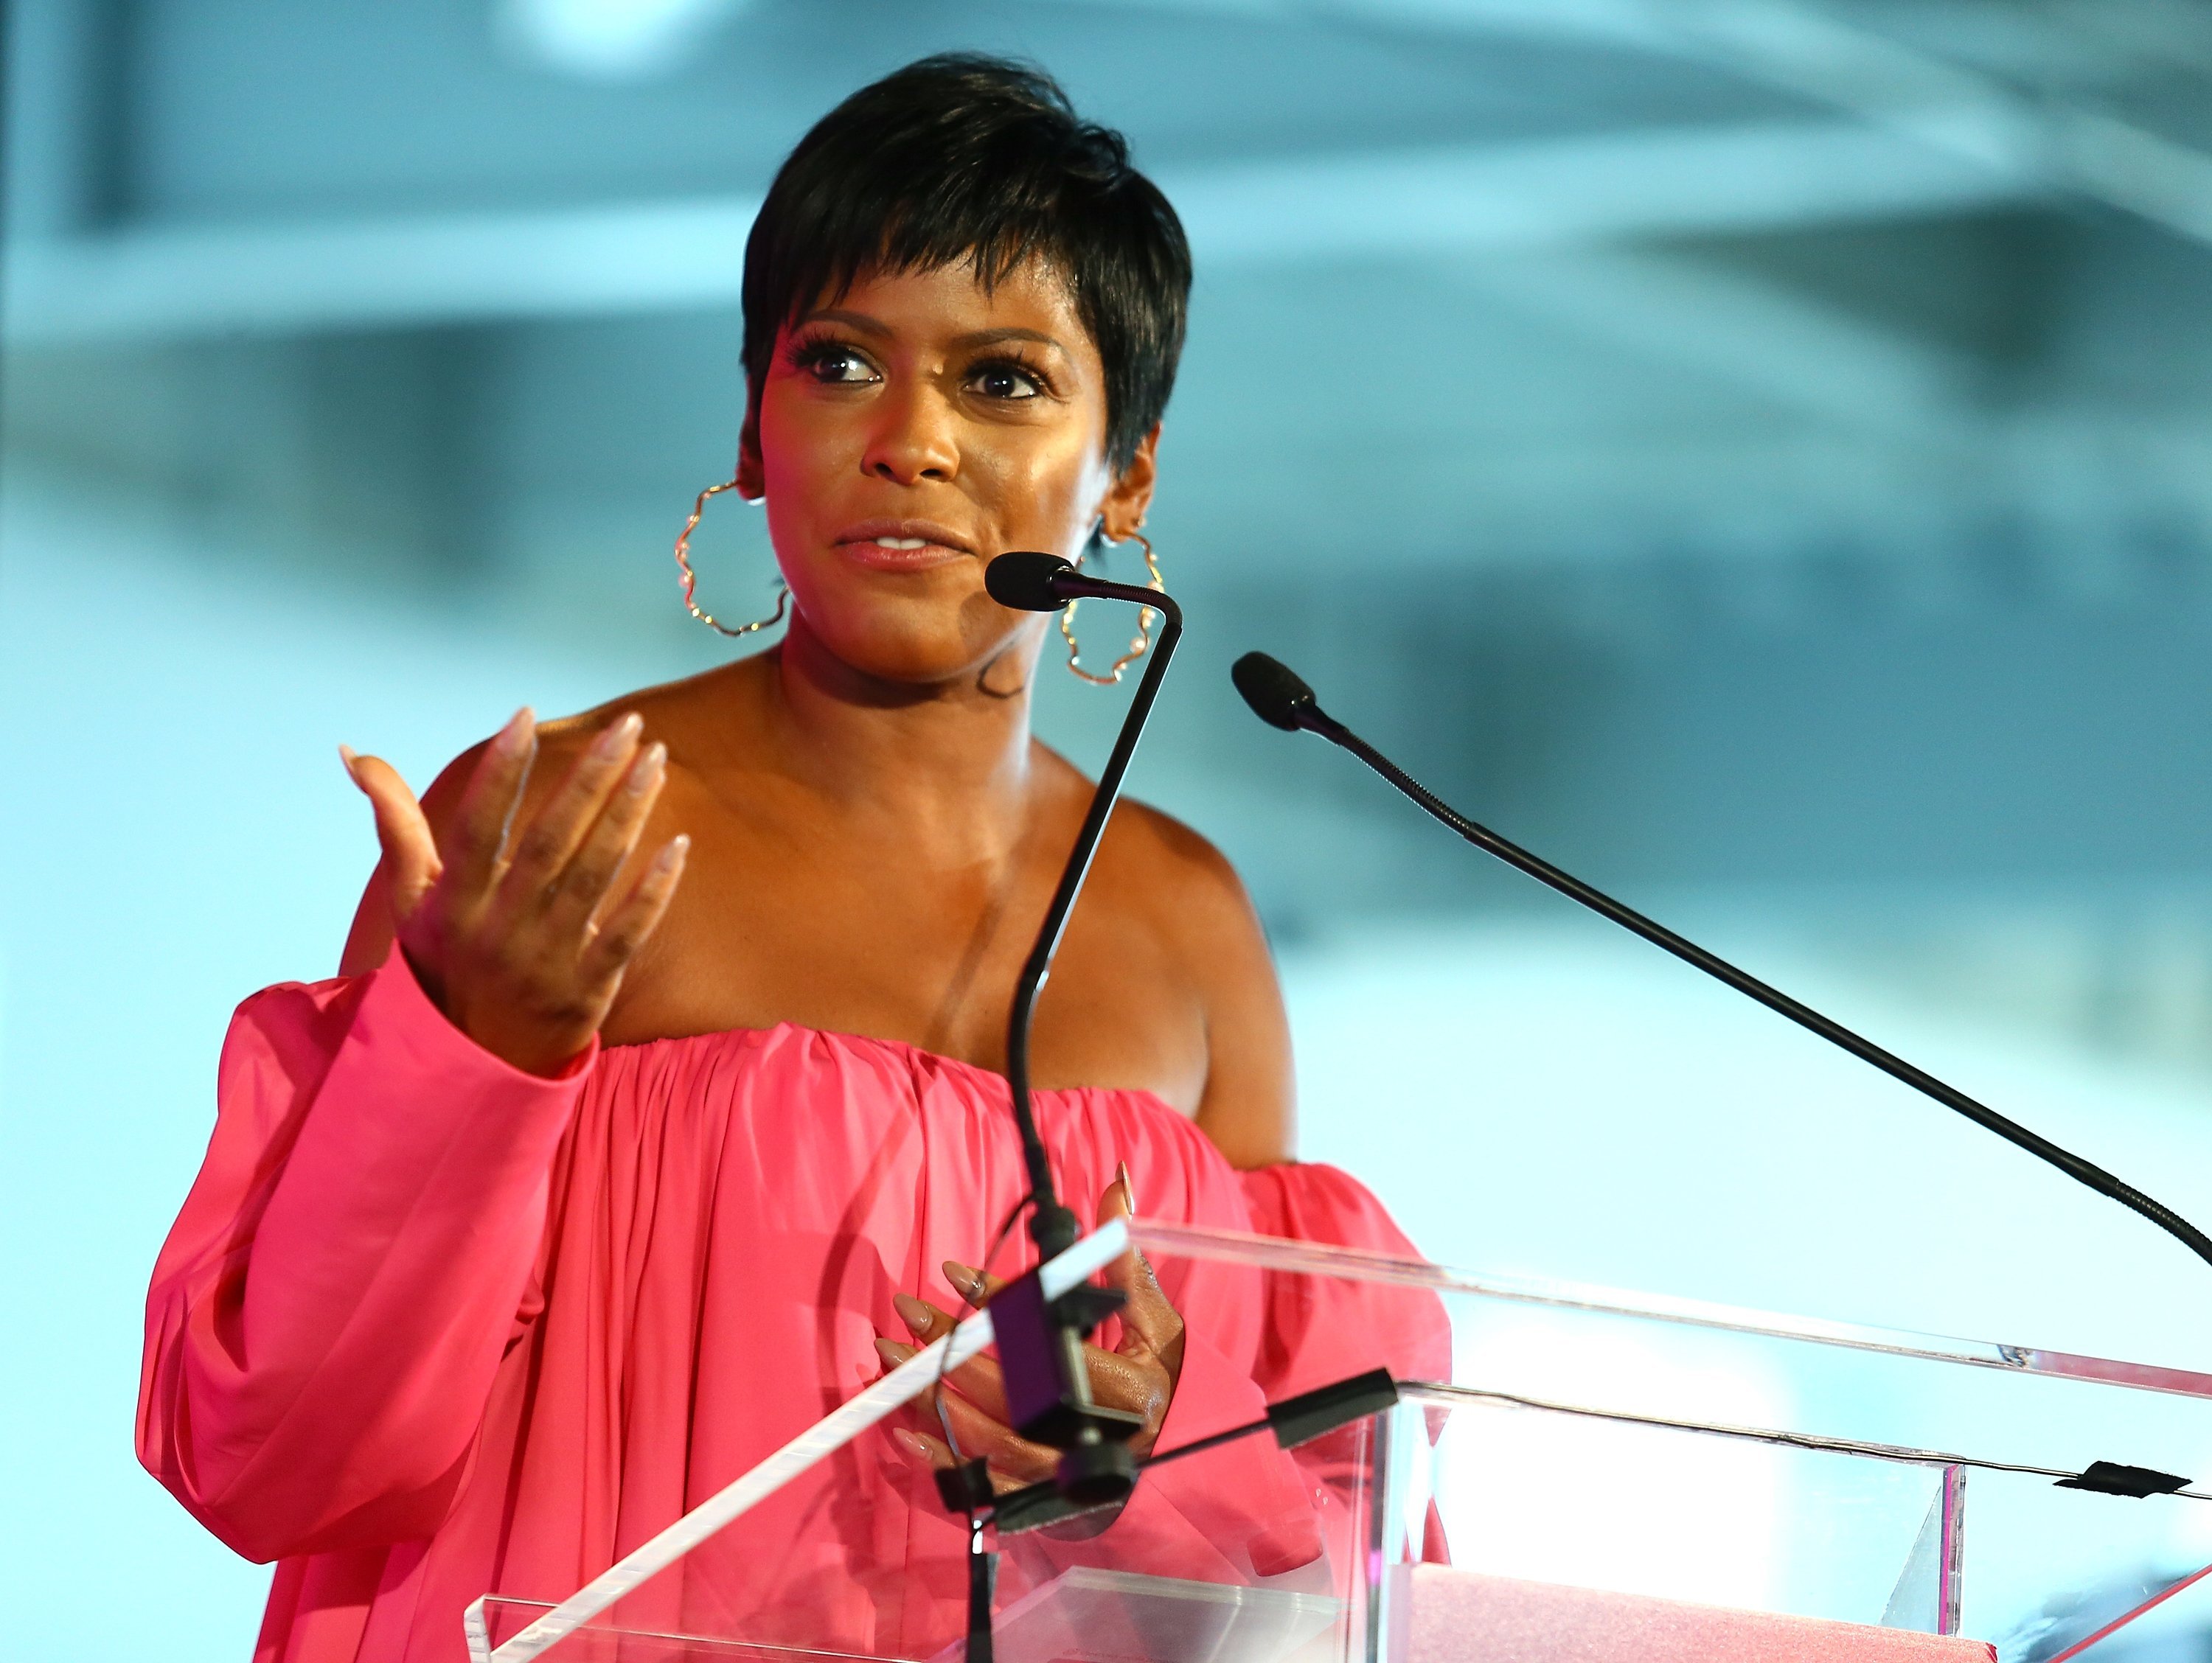 Tamron Hall speaks at the #BlogHer 18 Creators Summit in New York City on August 9, 2018 | Photo: Getty Images